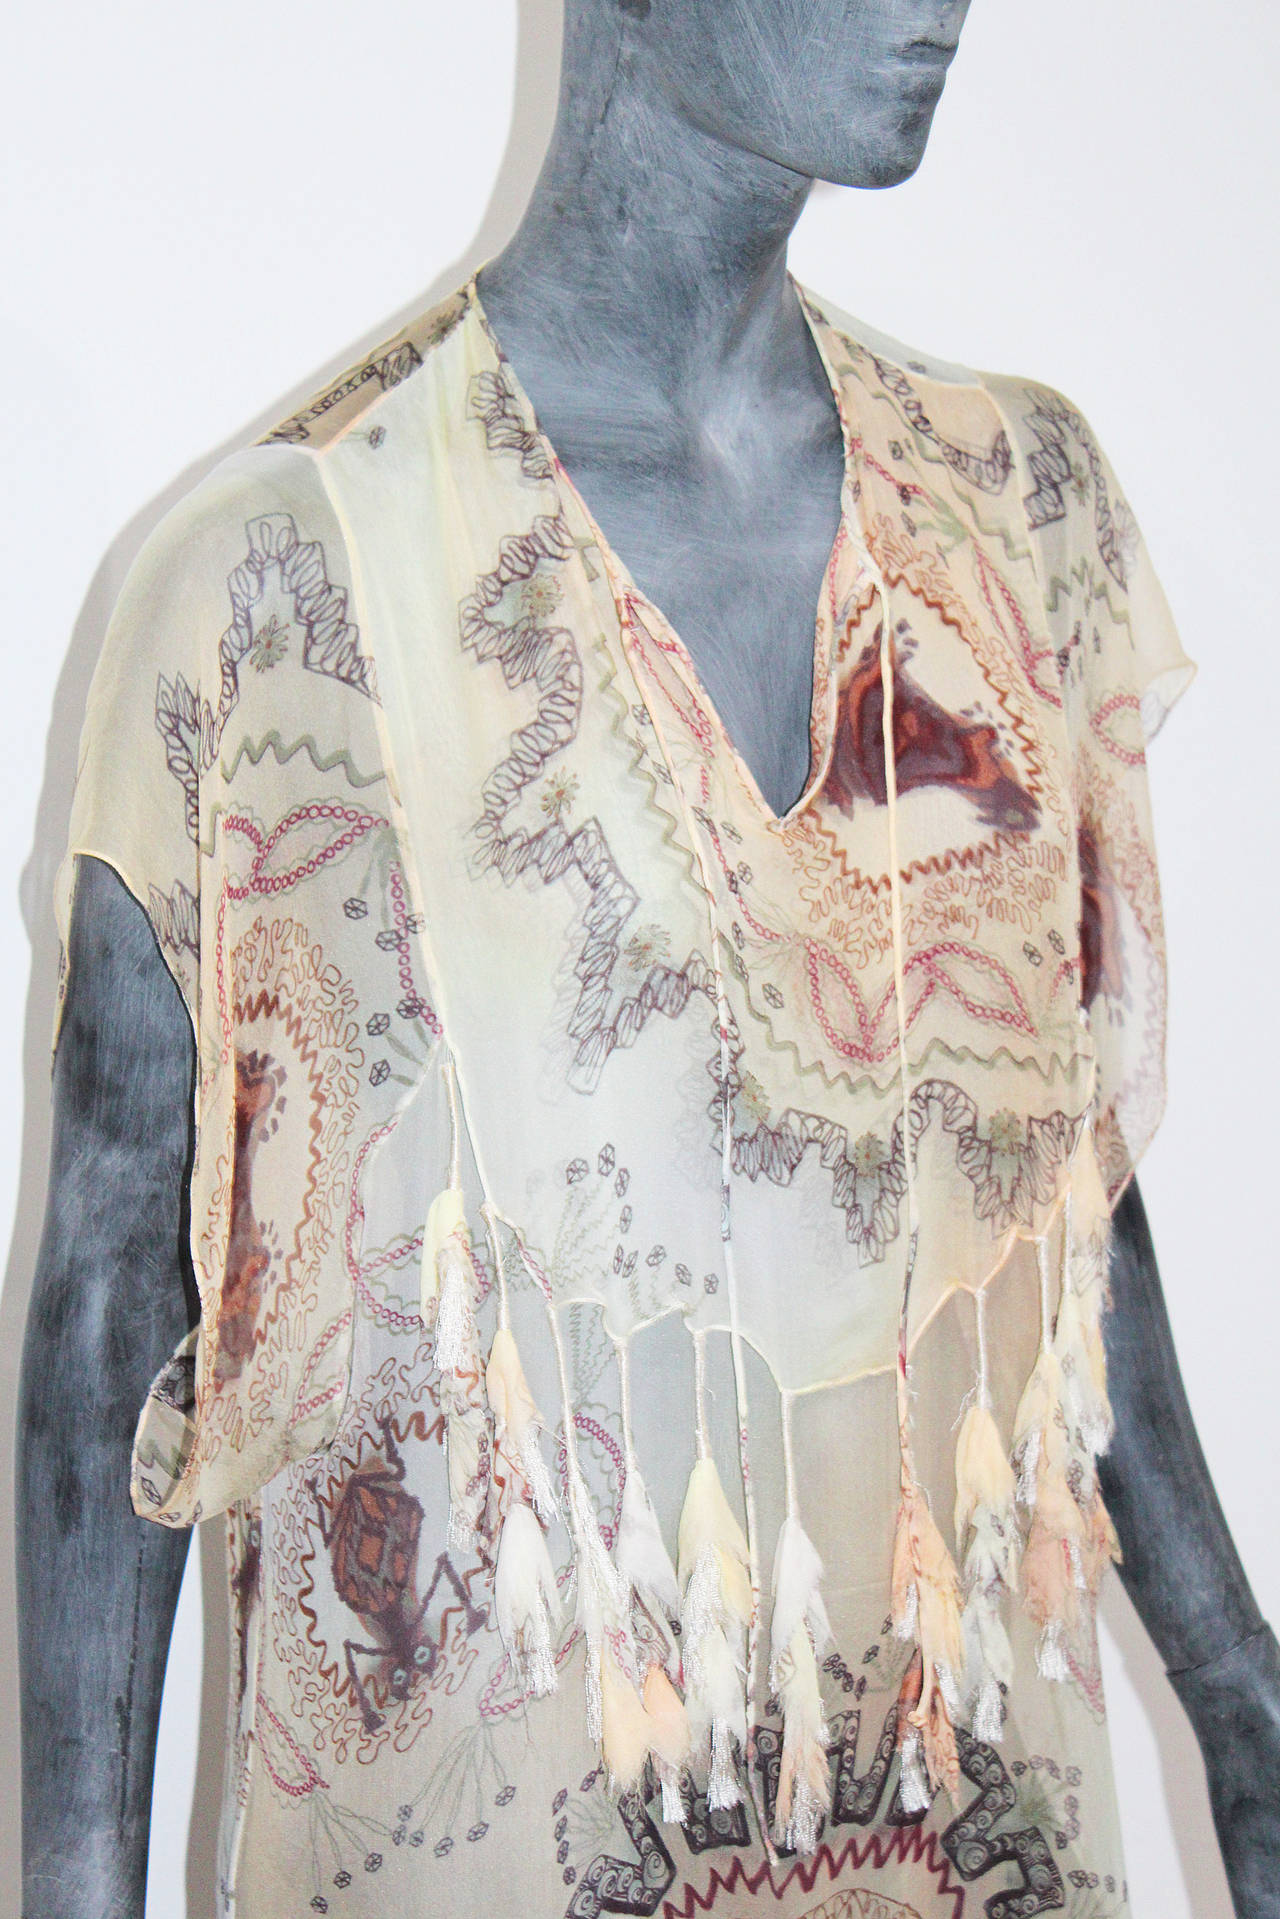 A spring/summer Christian Dior silk chiffon caftan. The caftan is to be worn over a swimsuit in the summer. 

Designed by John Galliano 

Size Small/Medium (Fr 38)